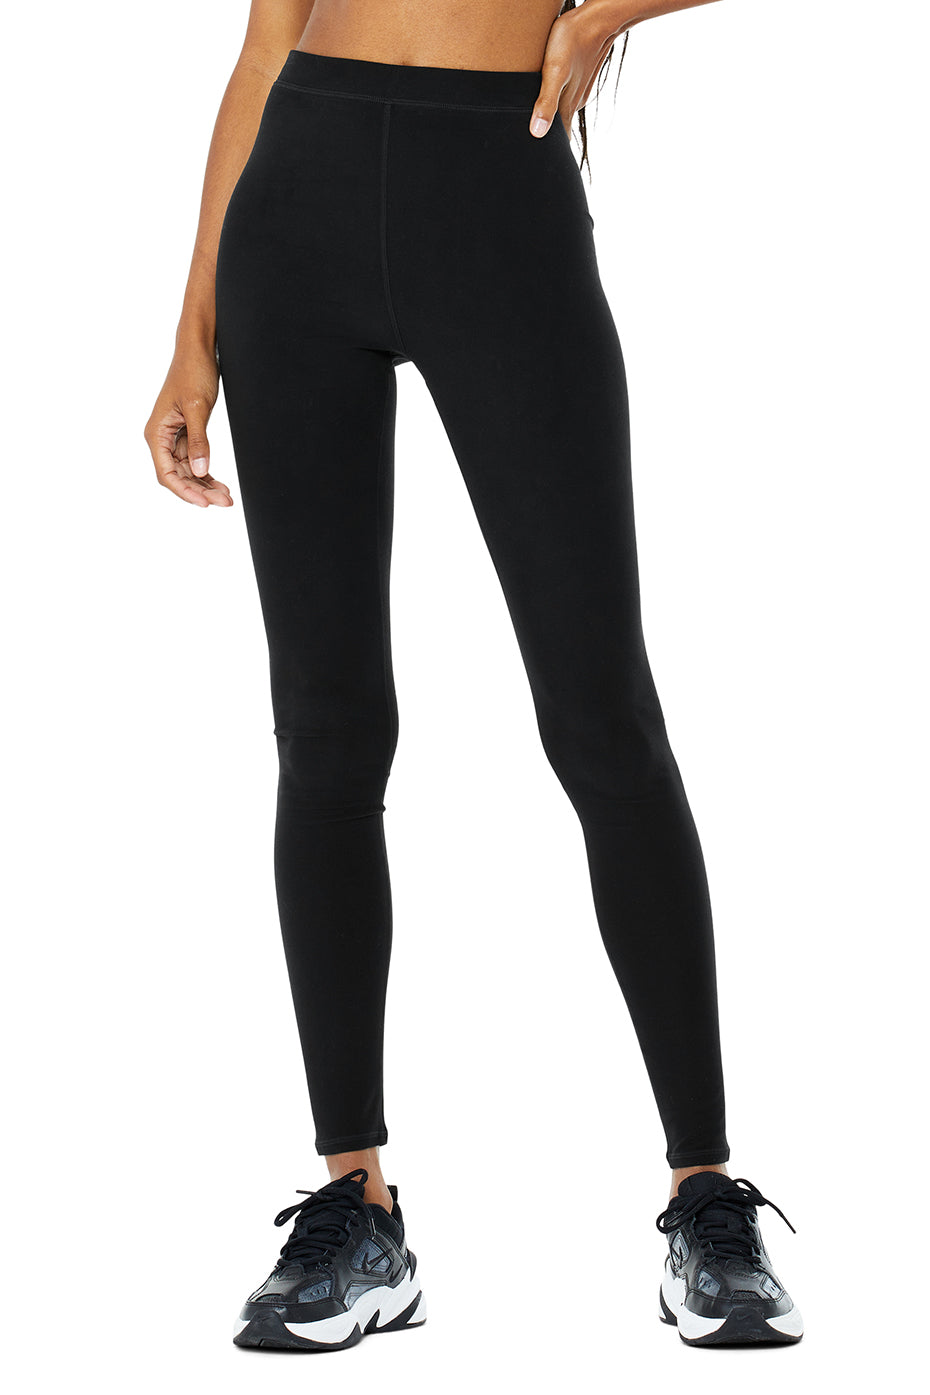 Alo Yoga Solid Black High Rise Leggings XXS - $53 - From Taylor